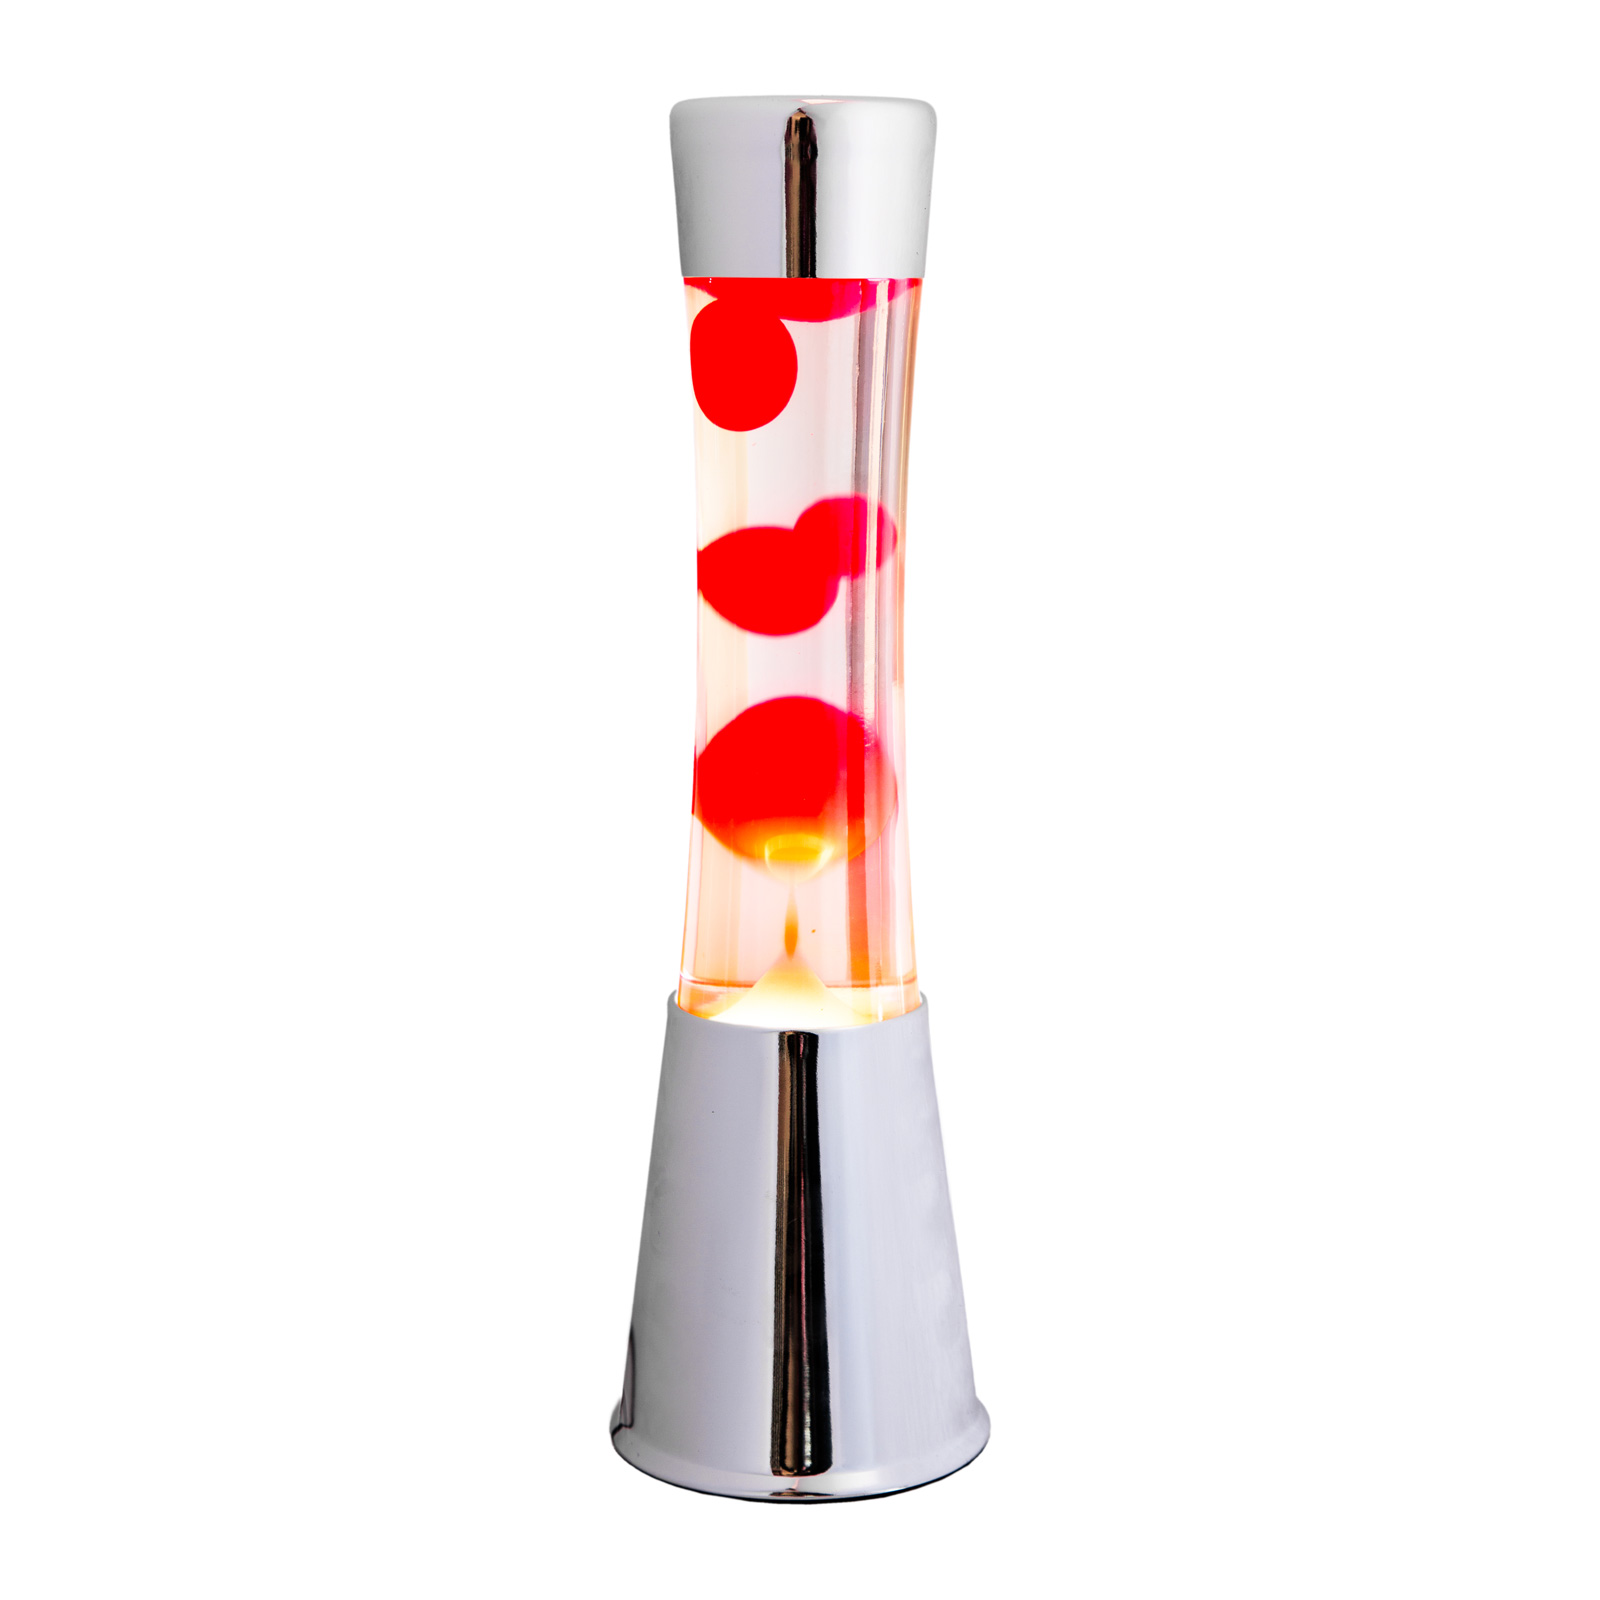 Lava Lamp TOWER red 